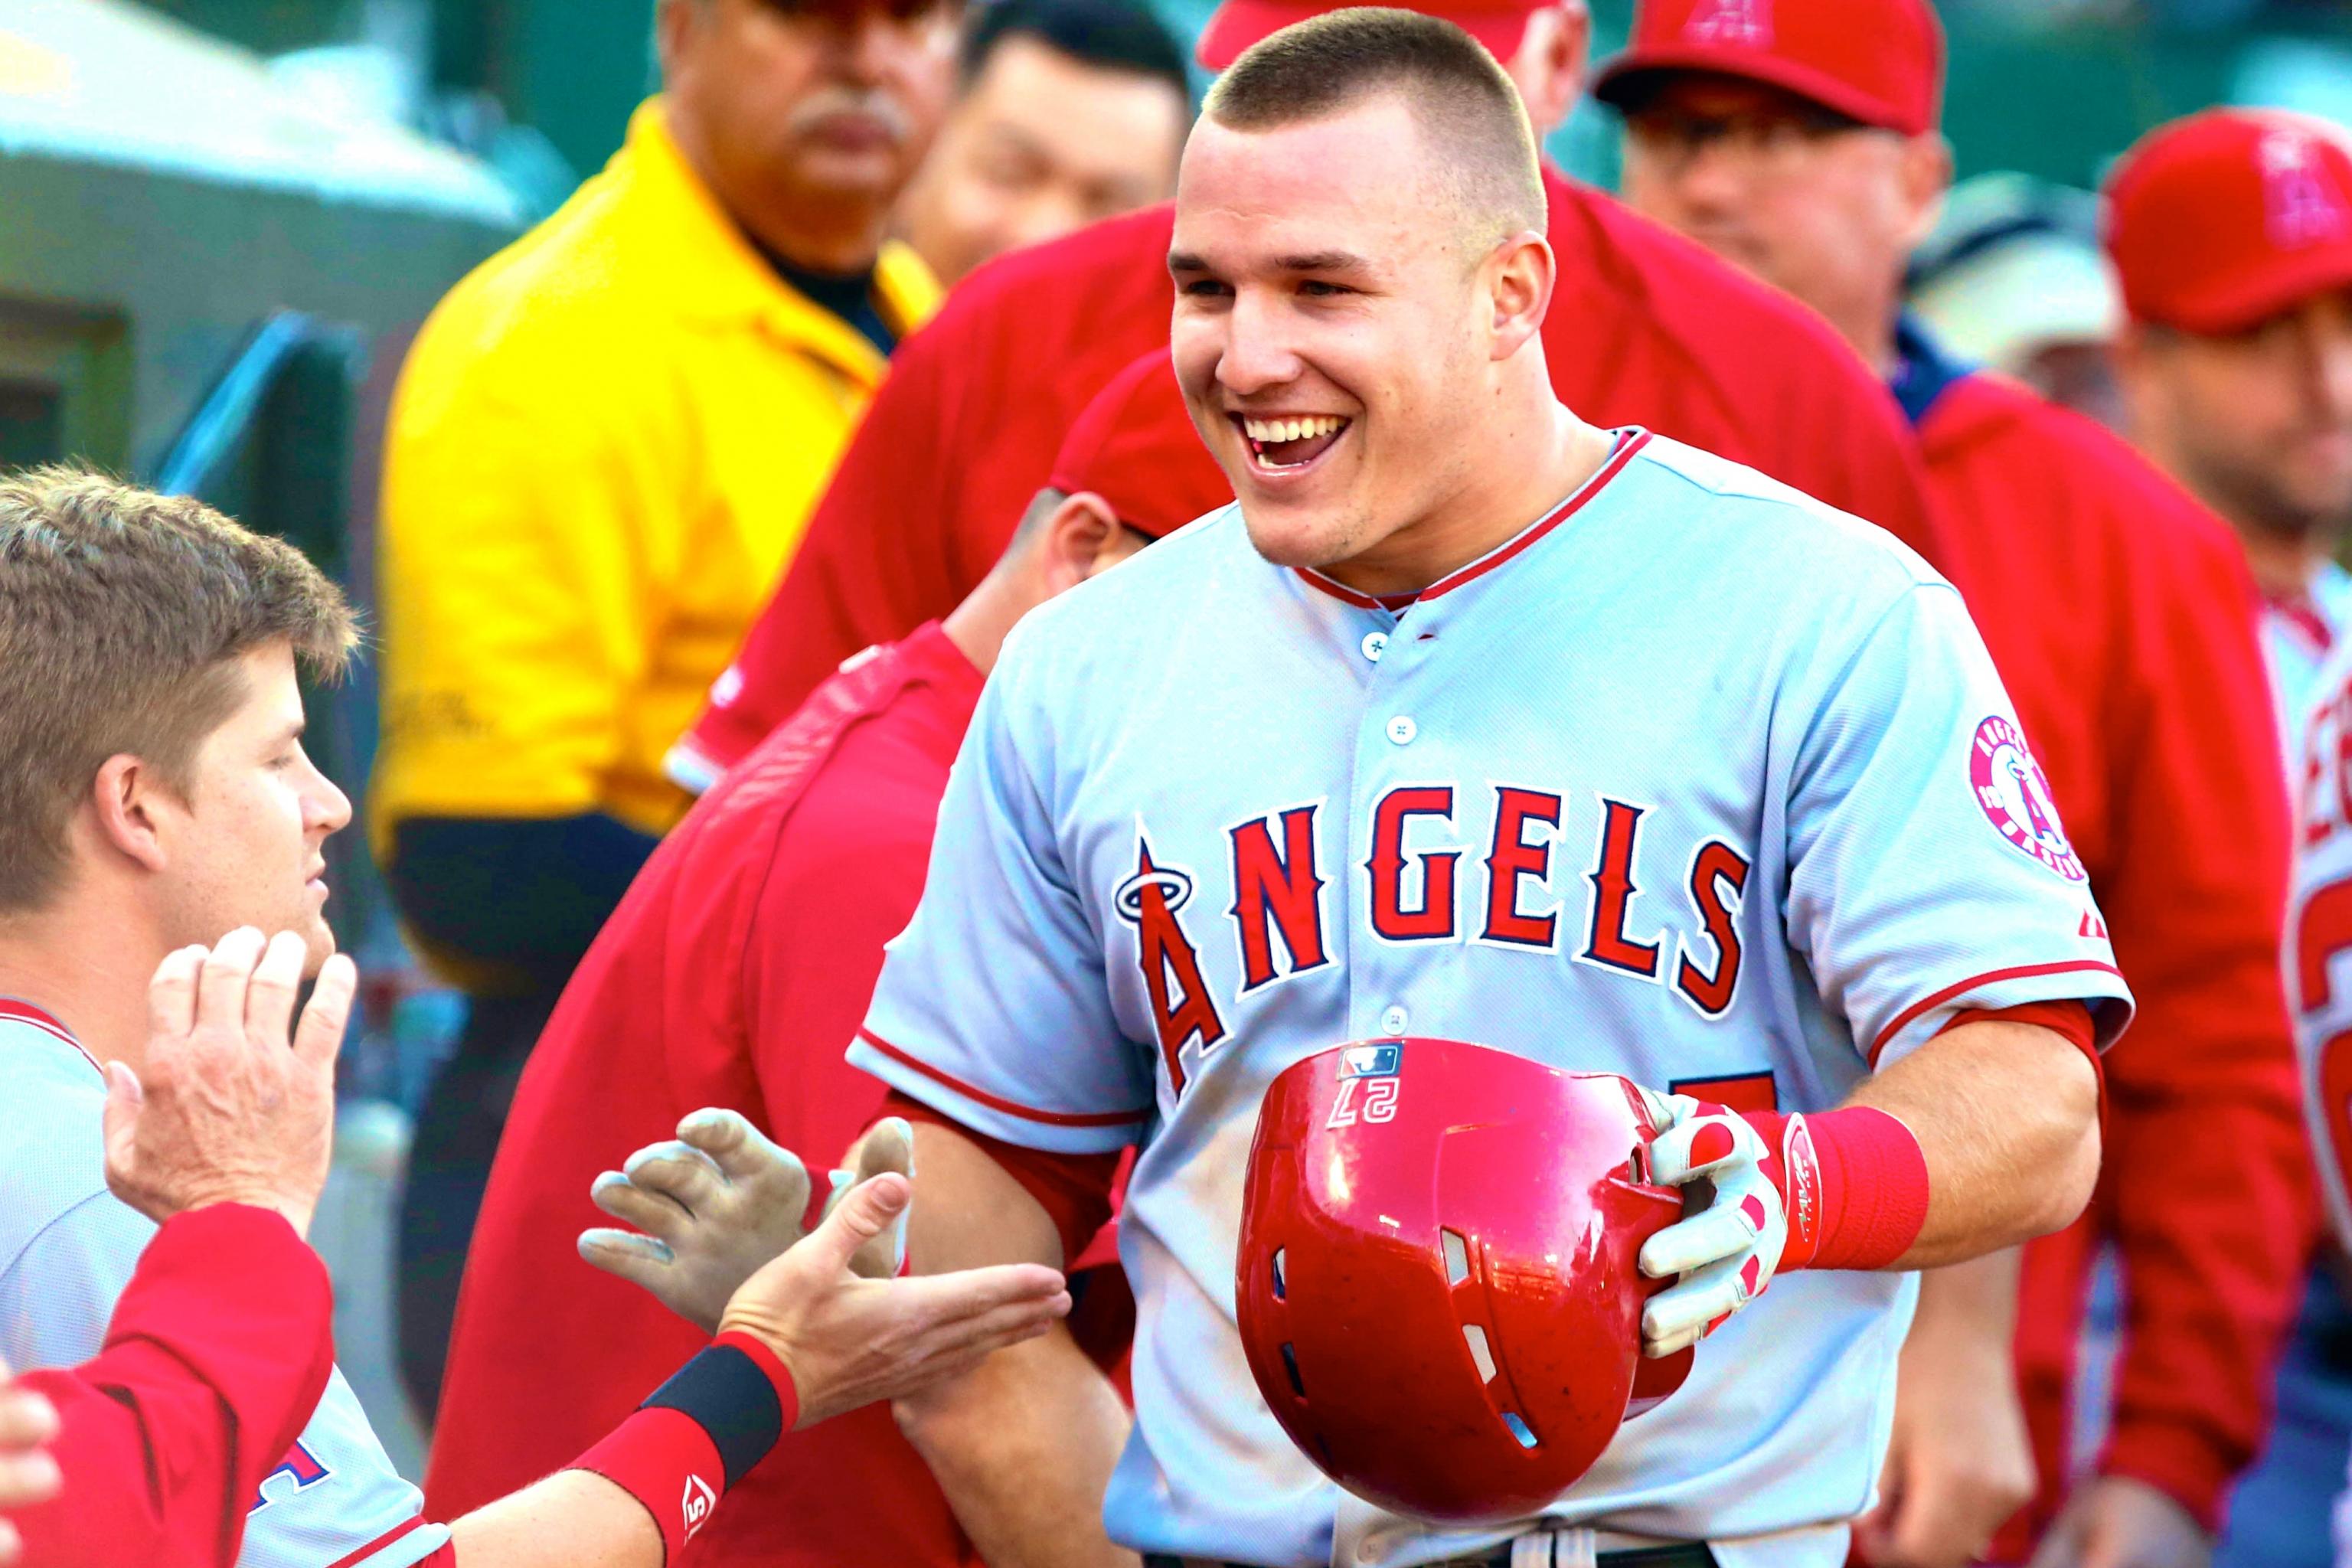 SF Giants' Kapler on Mike Trout: 'We're seeing the best player ever